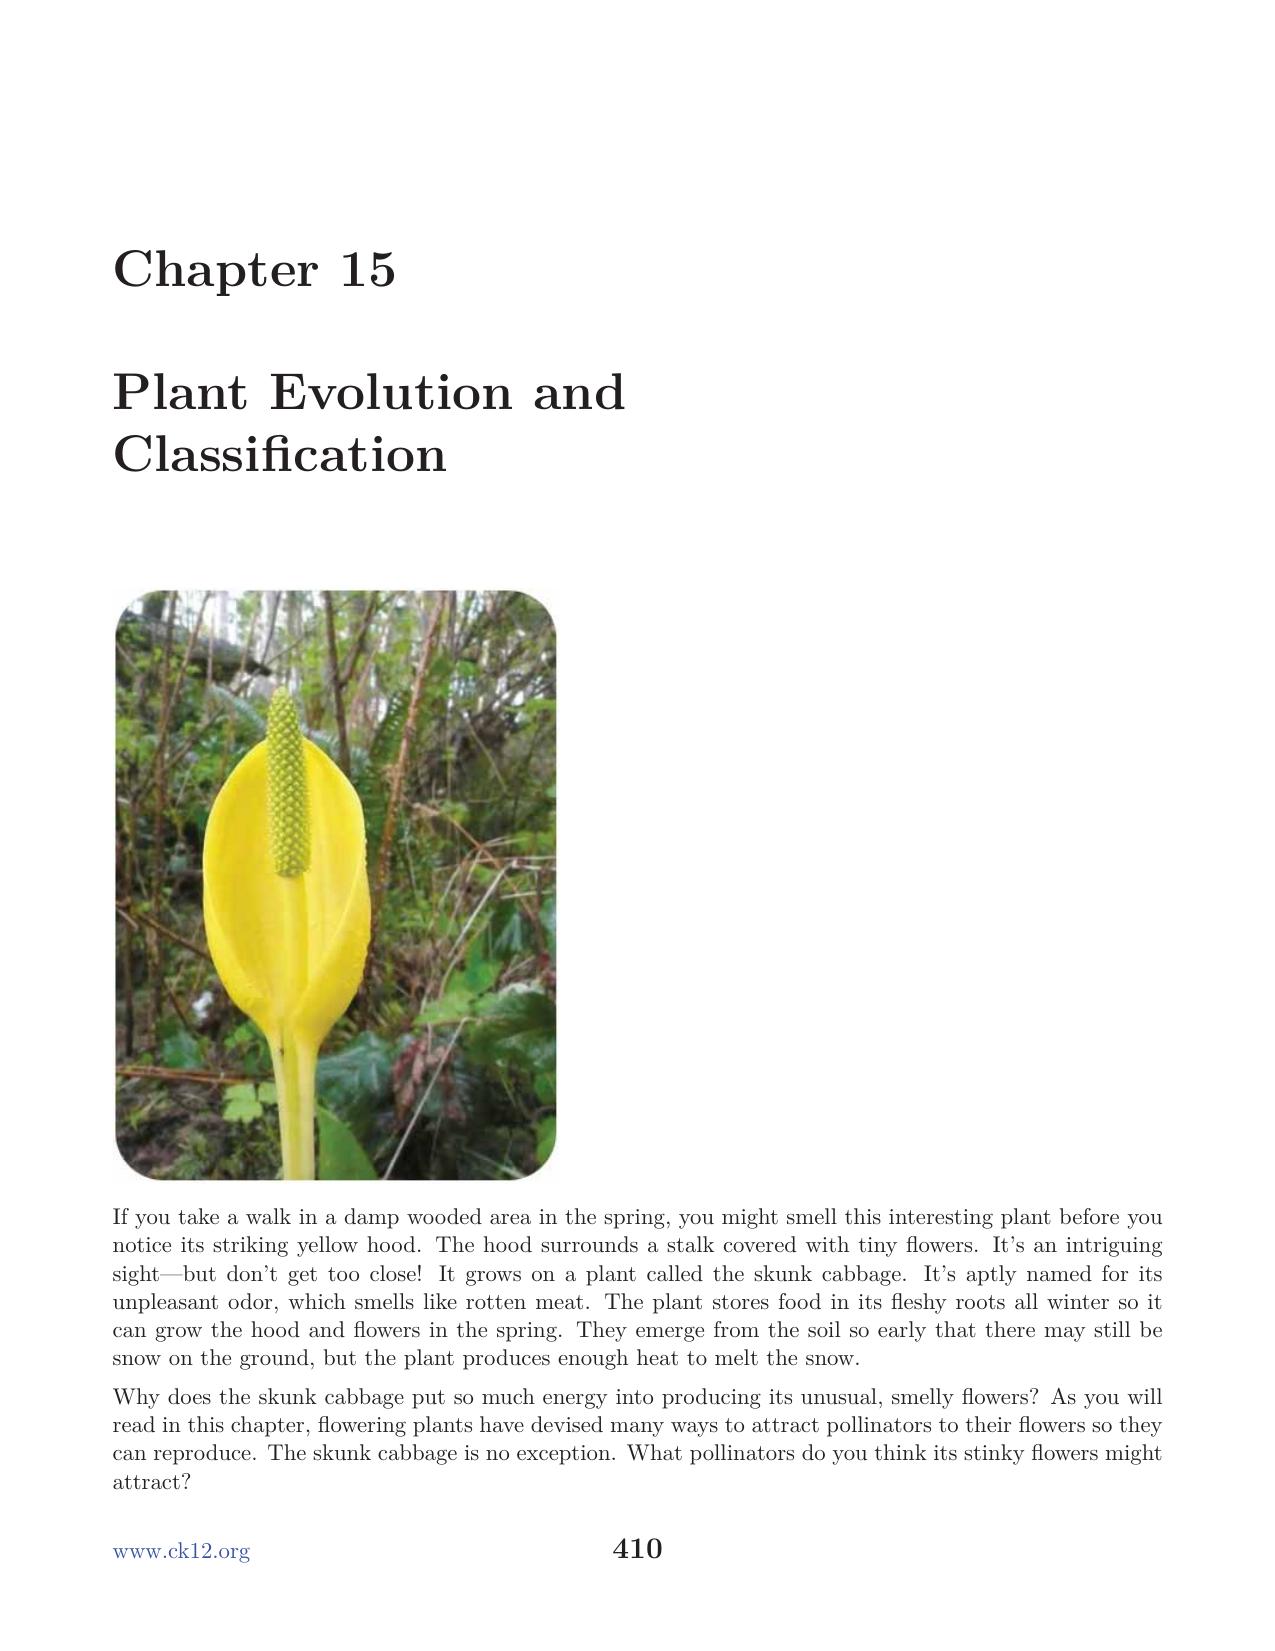 Biology Chapter15